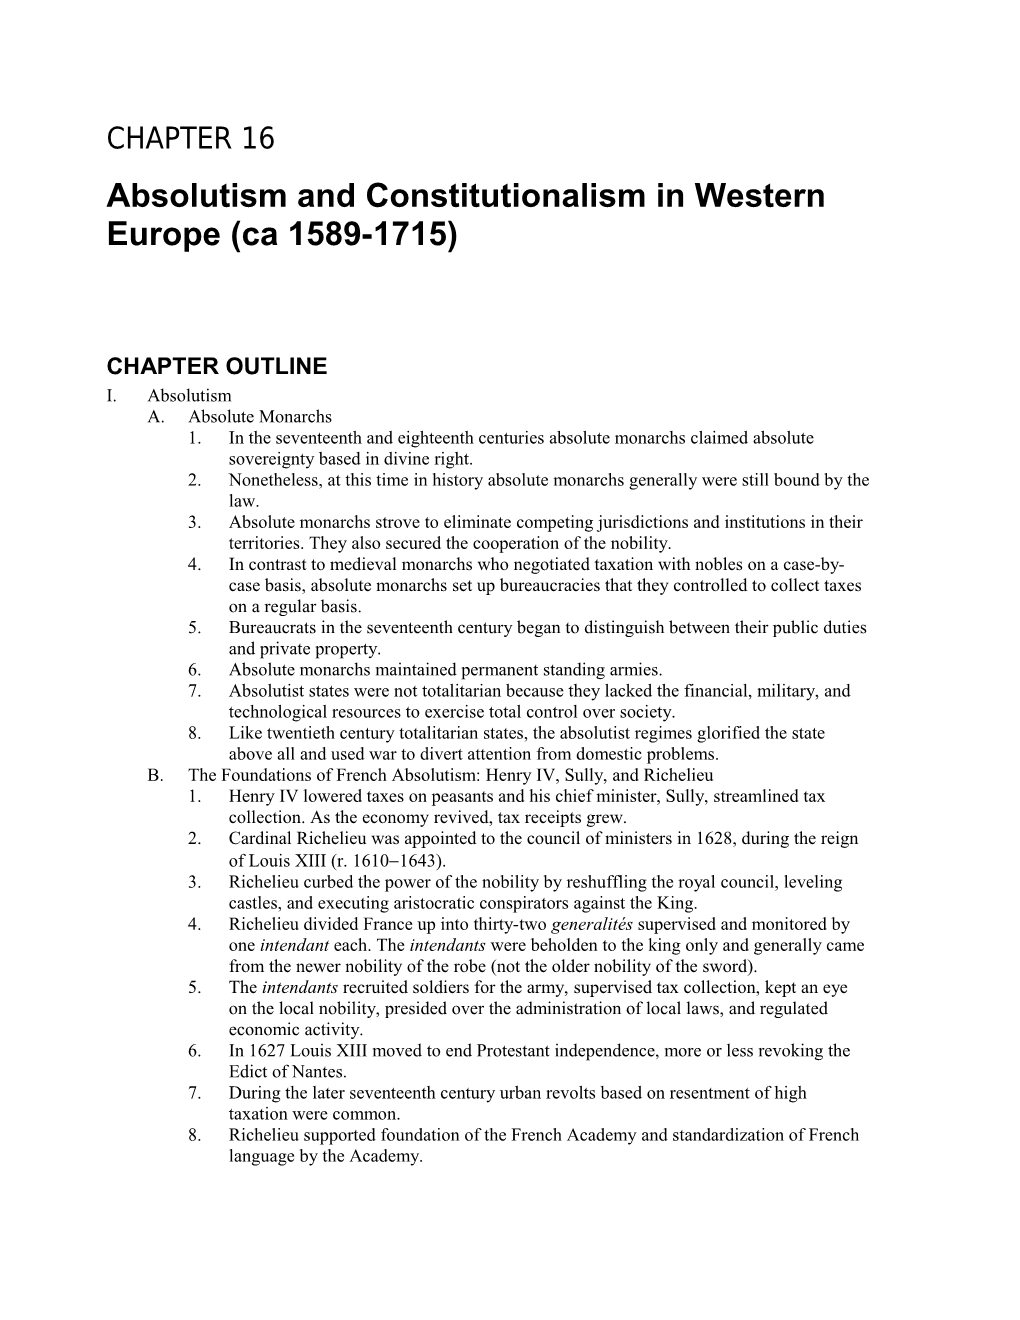 Absolutism and Constitutionalism in Western Europe (Ca 1589-1715)